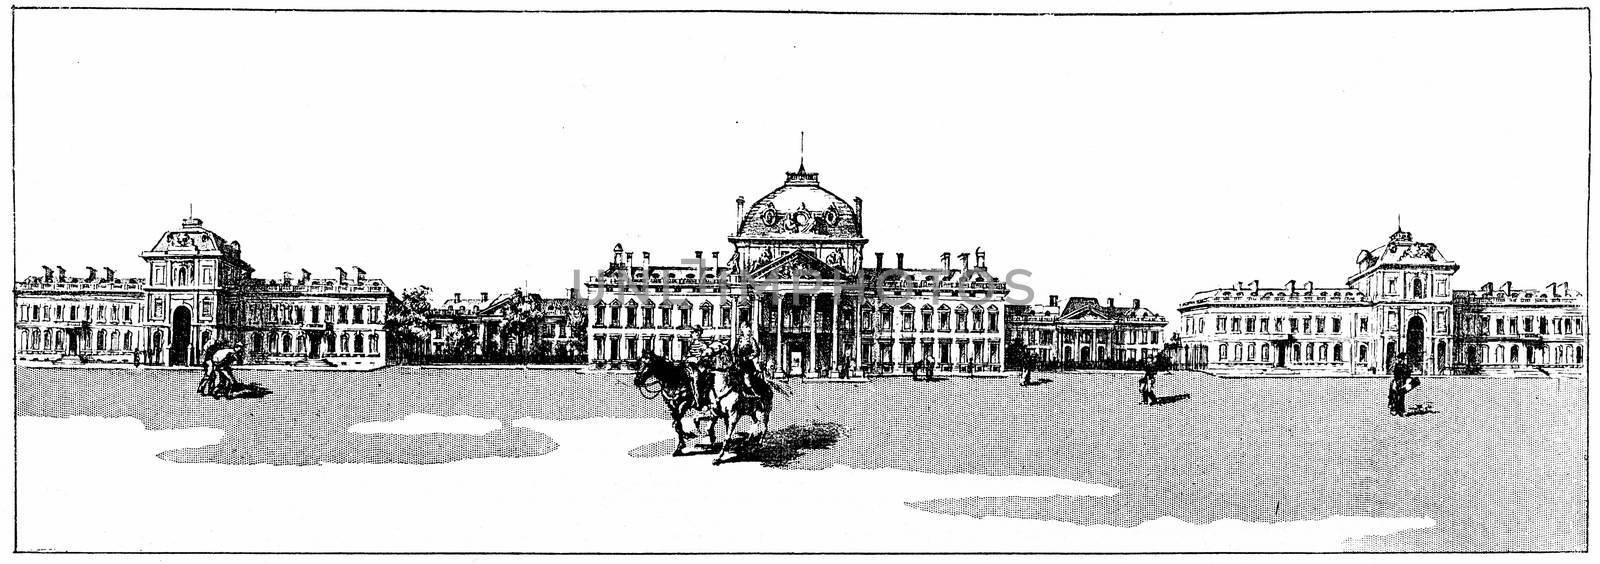 The palace of the Military Academy, vintage engraved illustration. Paris - Auguste VITU – 1890.